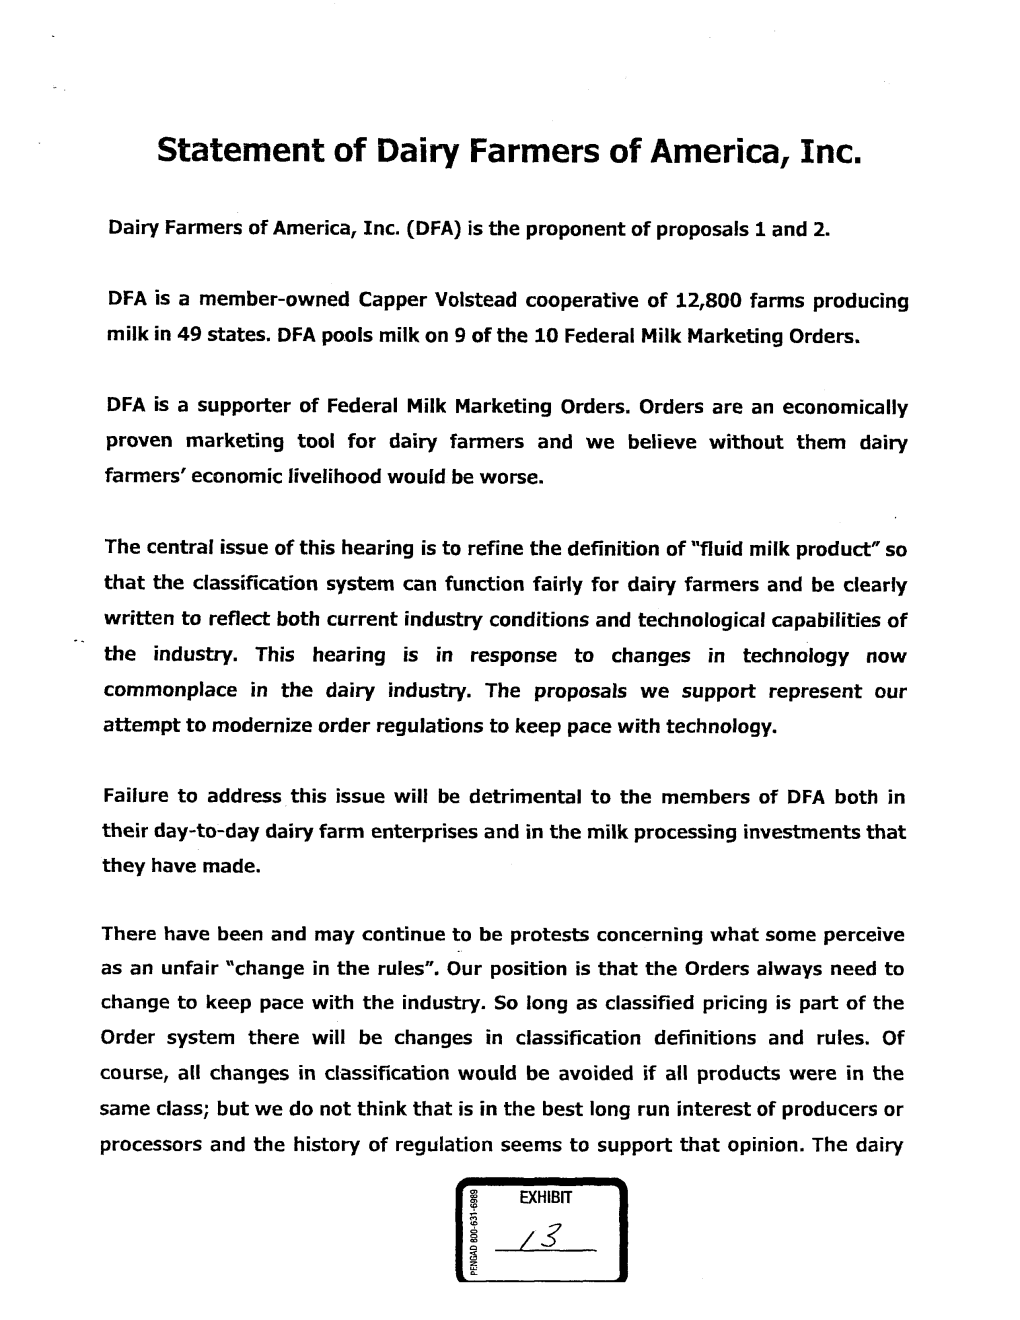 Statement of Dairy Farmers of America, Inc